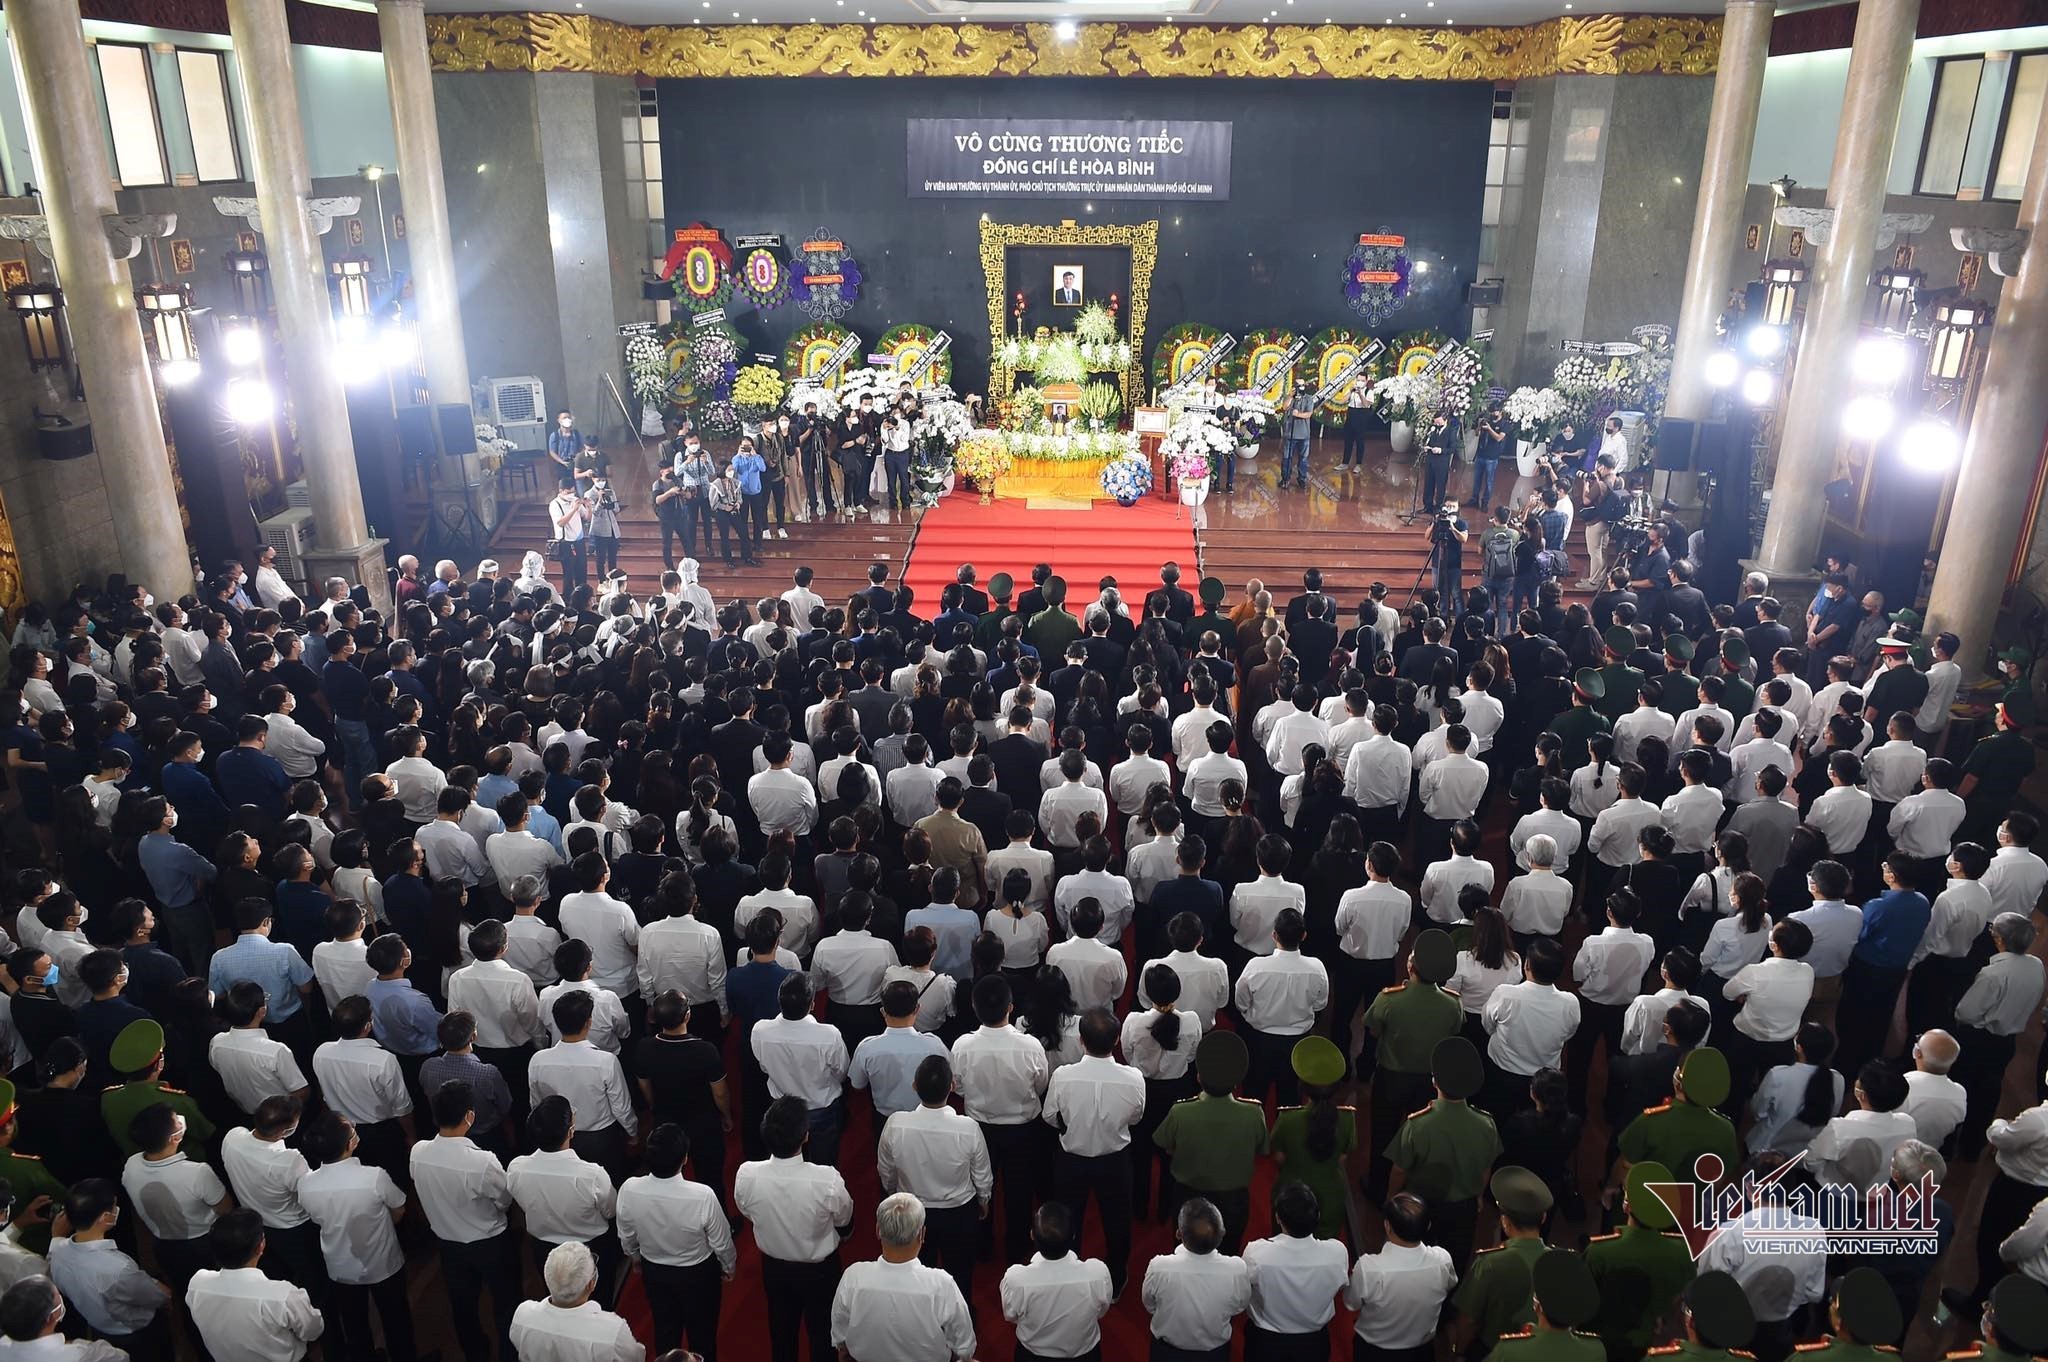 President of Ho Chi Minh City: Le Hoa Binh's imprint remains forever on many city projects